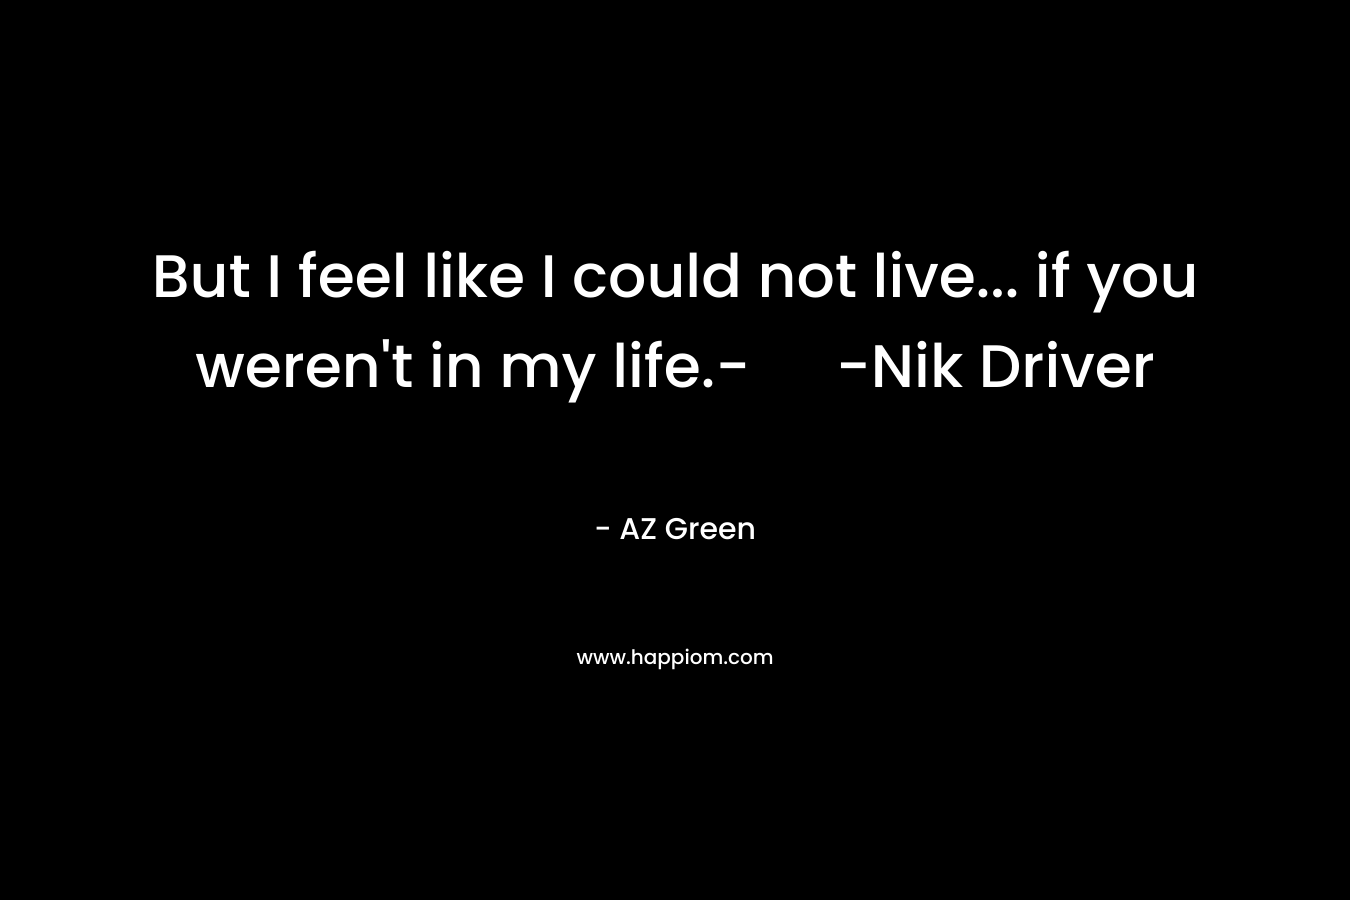 But I feel like I could not live... if you weren't in my life.- -Nik Driver